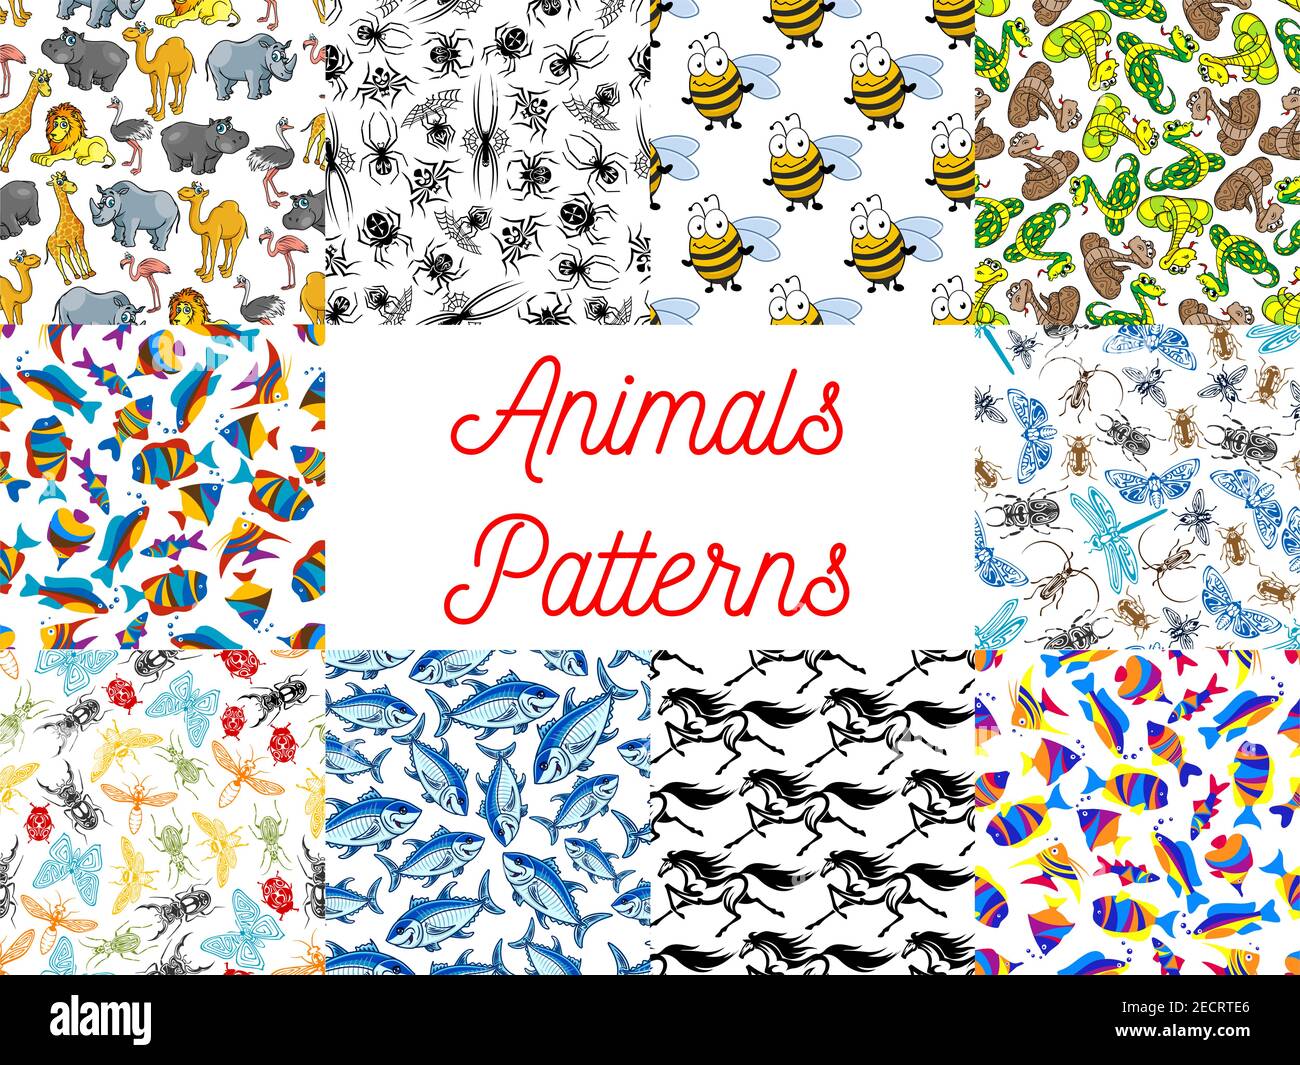 Animals seamless backgrounds set. Wallpapers with pattern of zoo camel, lion, flamingo, rhinoceros, hippopotamus, giraffe, ostrich. Insects fly, drago Stock Vector